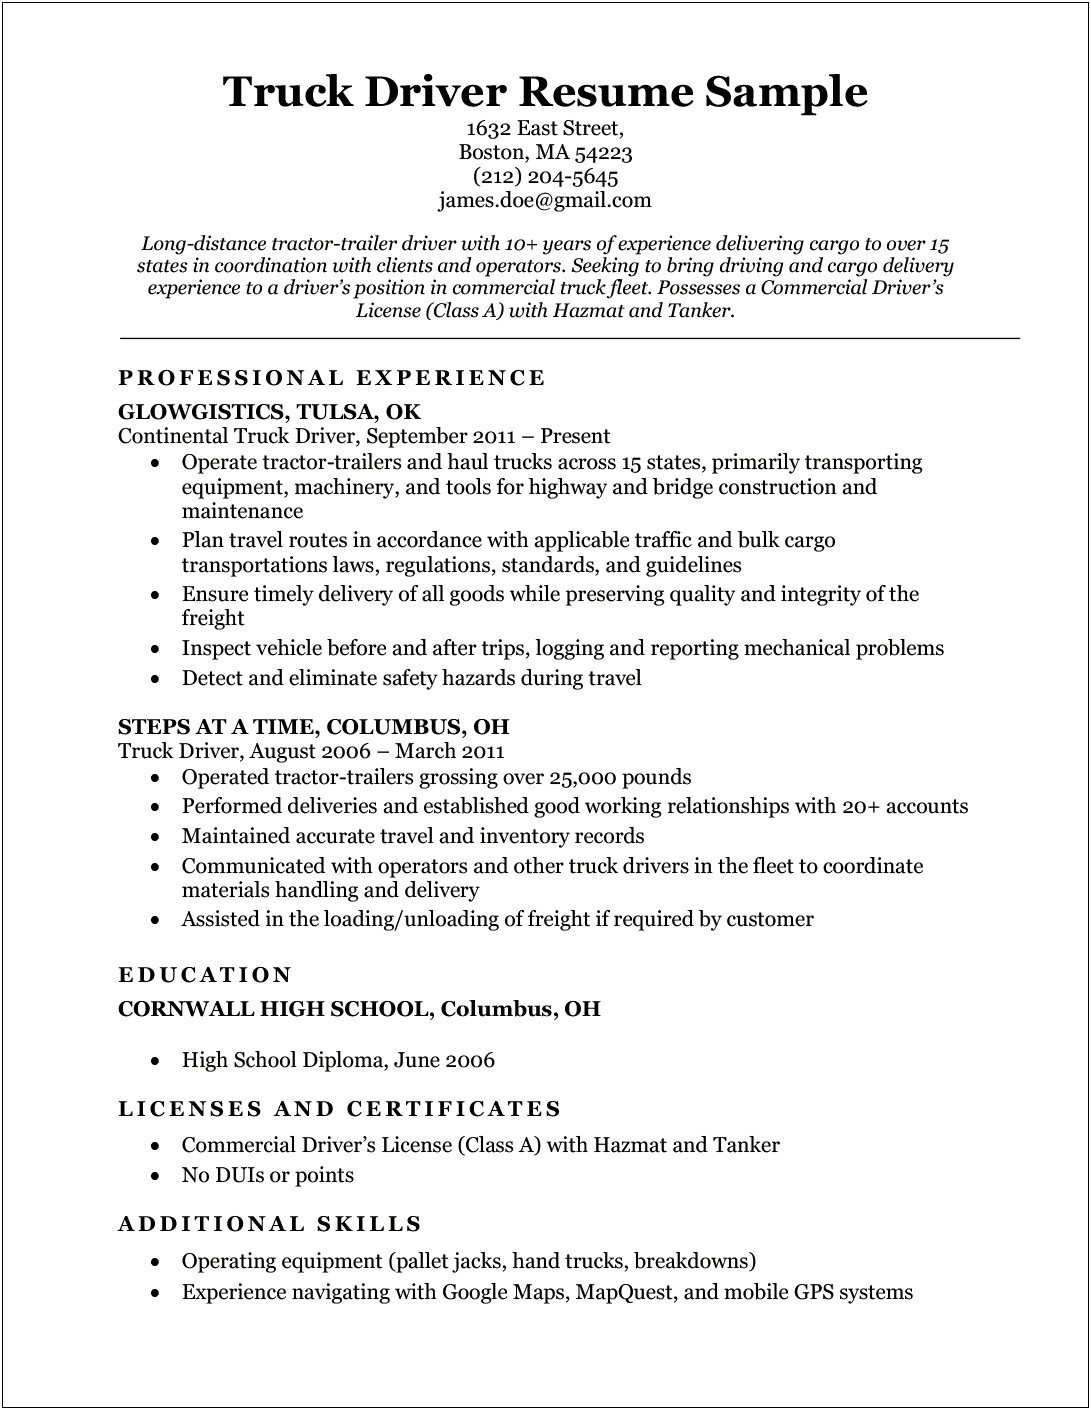 Sample Resume Objectives For No Work Experience